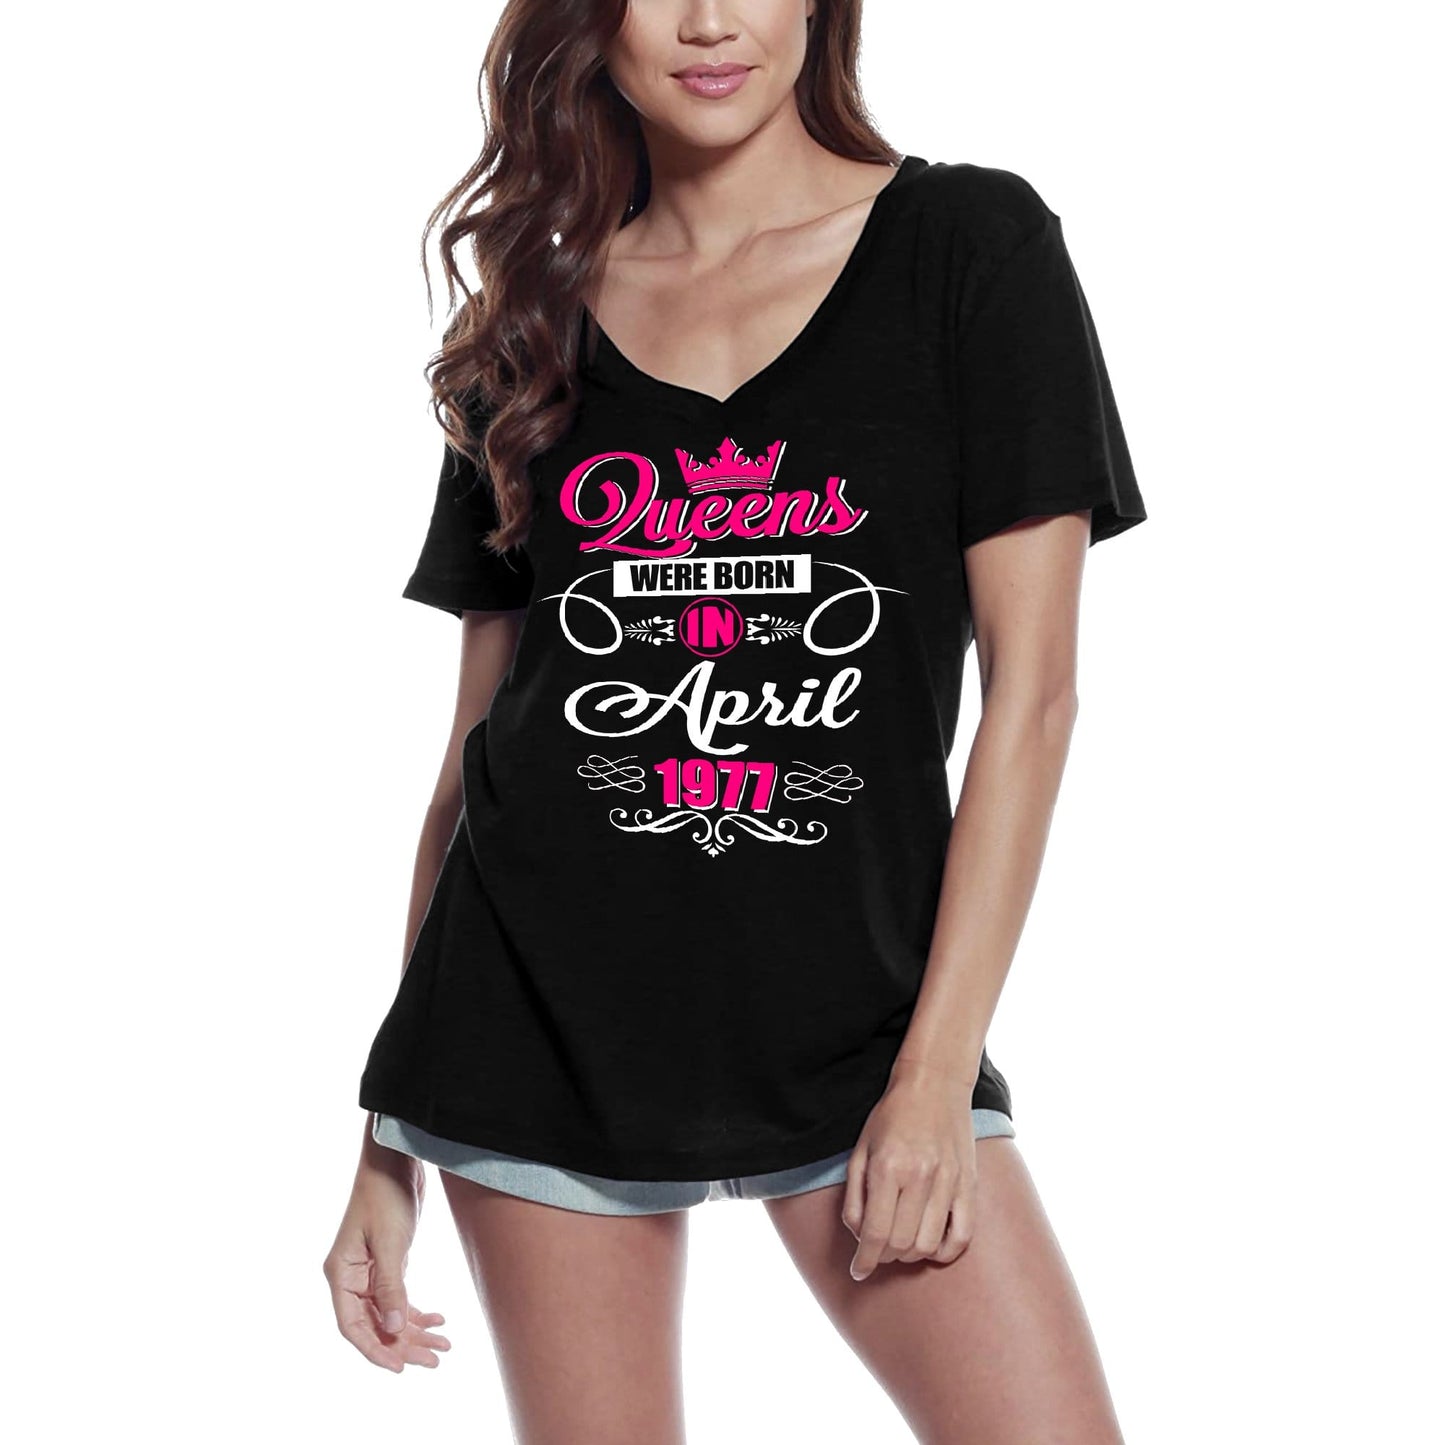 ULTRABASIC Women's T-Shirt Queens Were Born in April 1977 - 43rd Birthday Shirt for Ladies